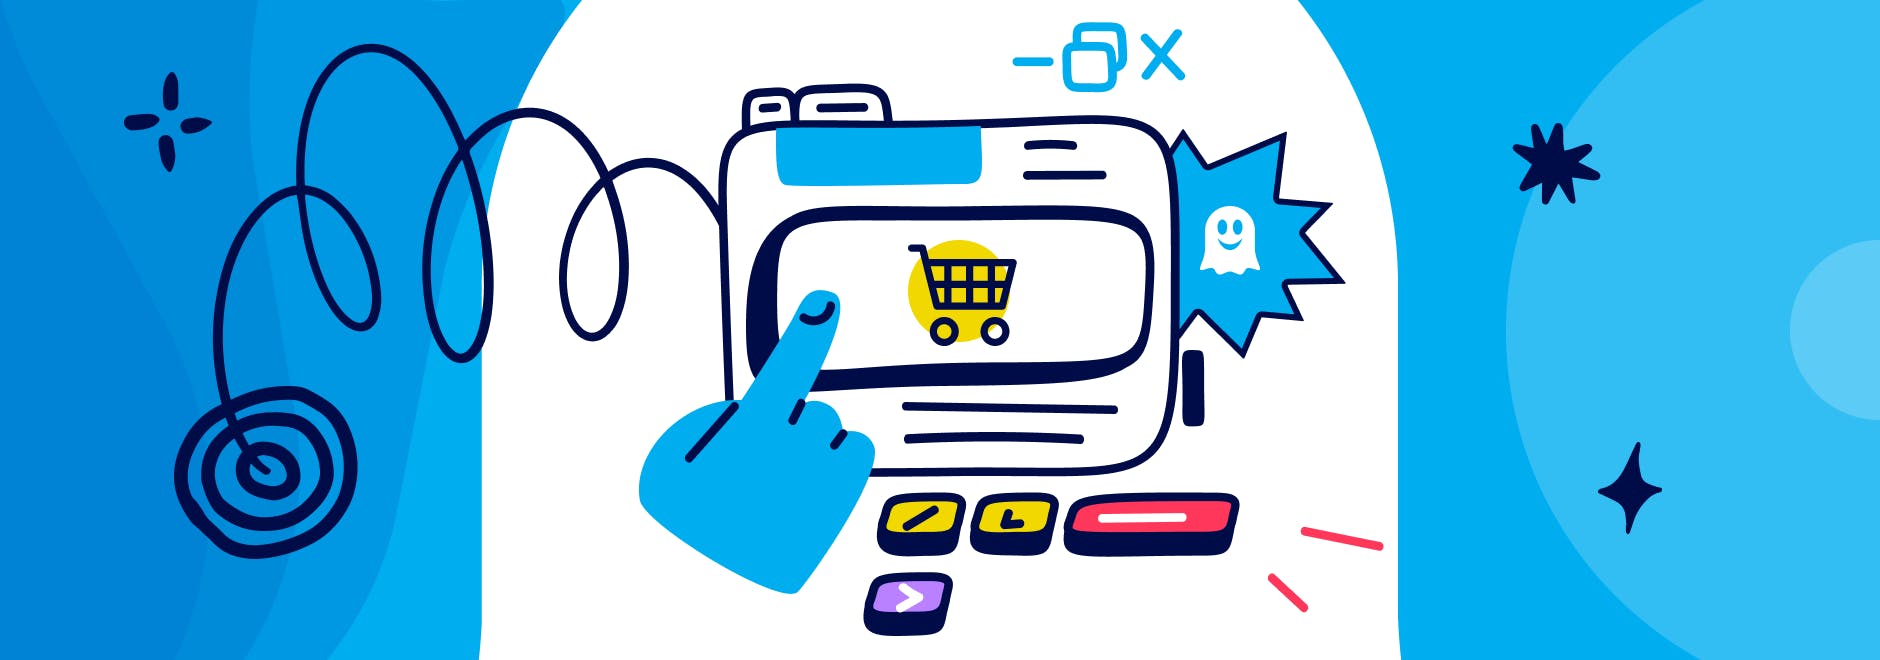 Ghostery’s best practices for online shopping during the holiday season